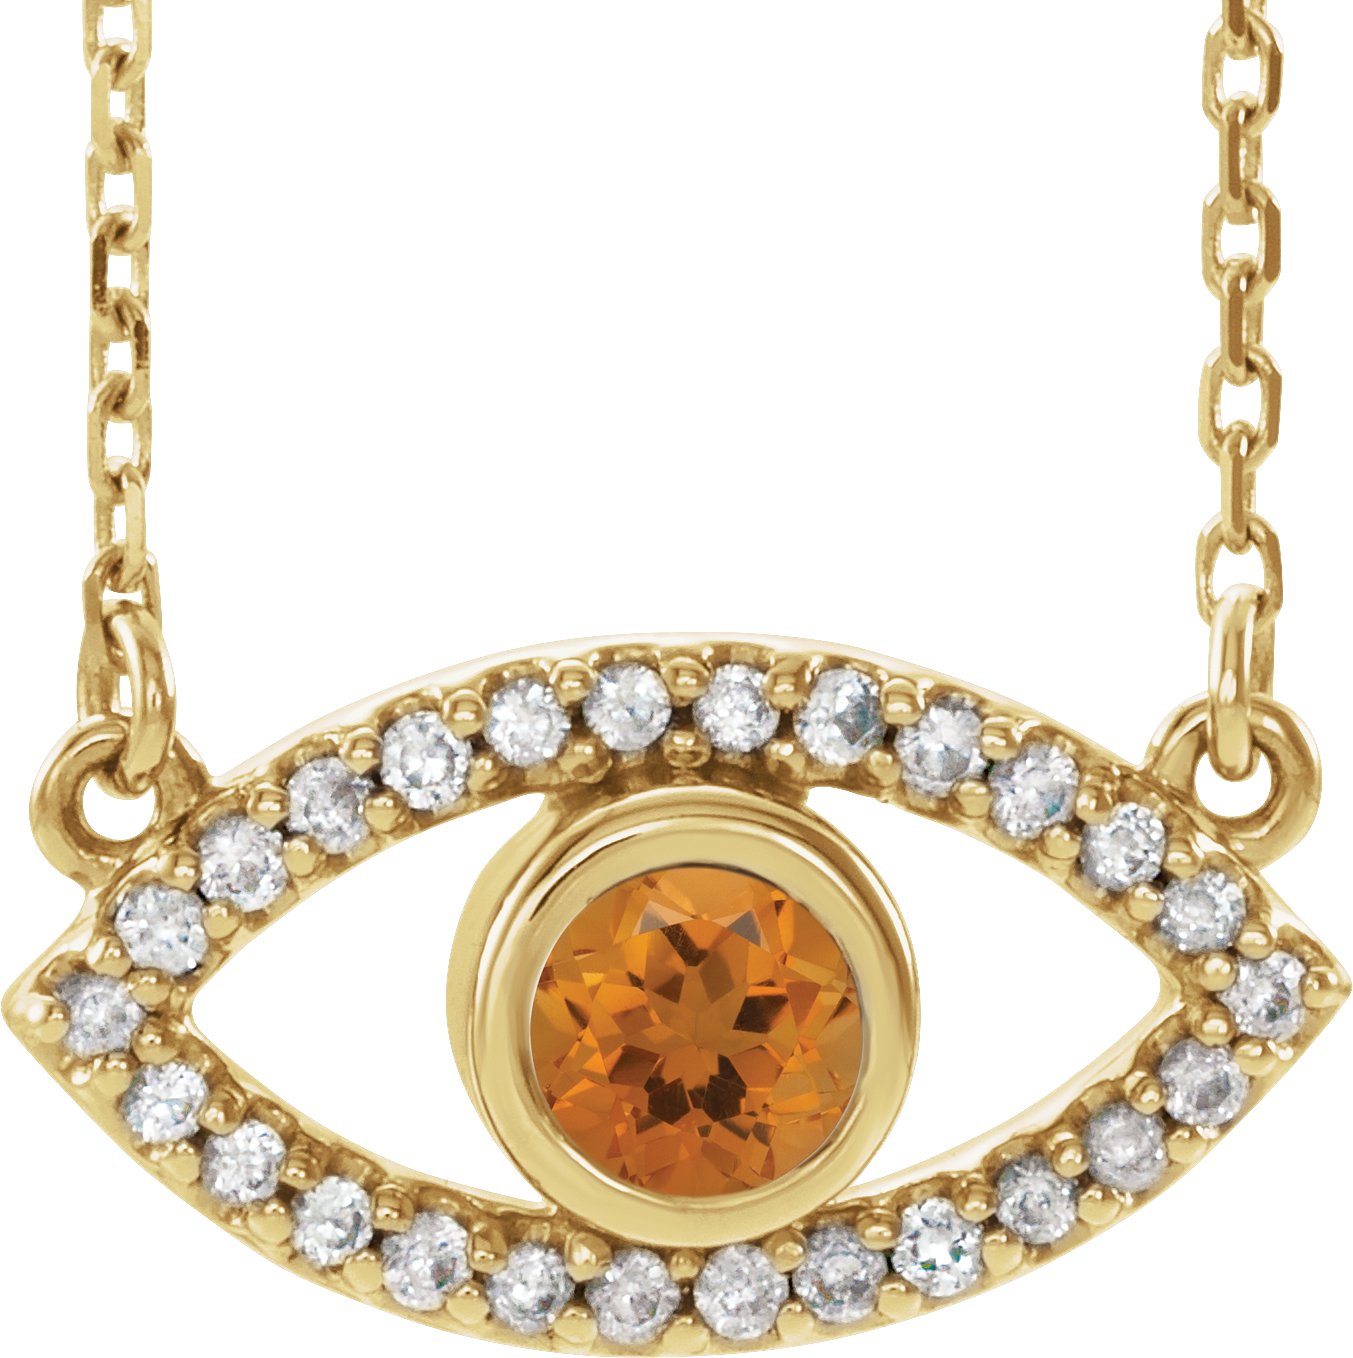 14K Yellow Citrine and White Sapphire Evil Eye 18 inch Necklace Ref. 14901644